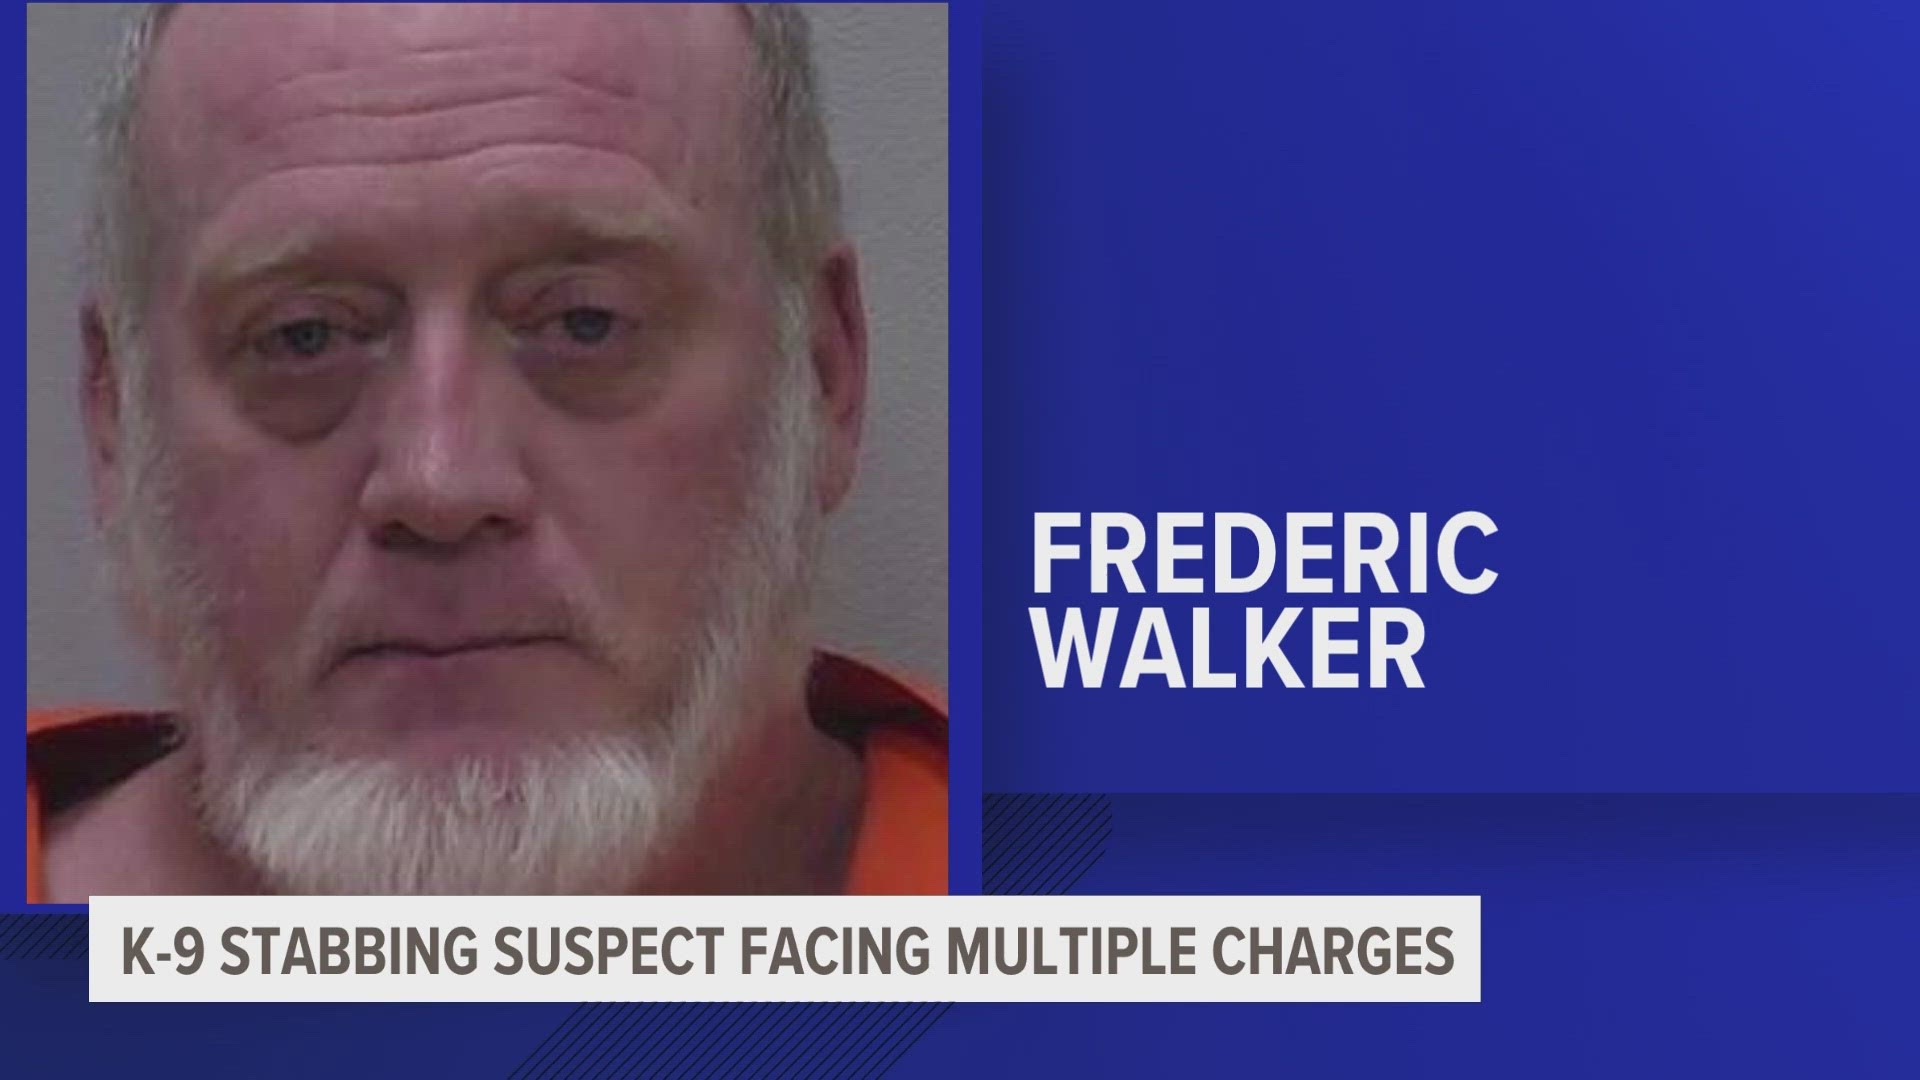 Frederic Allen Walker is facing multiple charges, including second-degree criminal sexual conduct, home invasion and two counts of assault with a dangerous weapon.